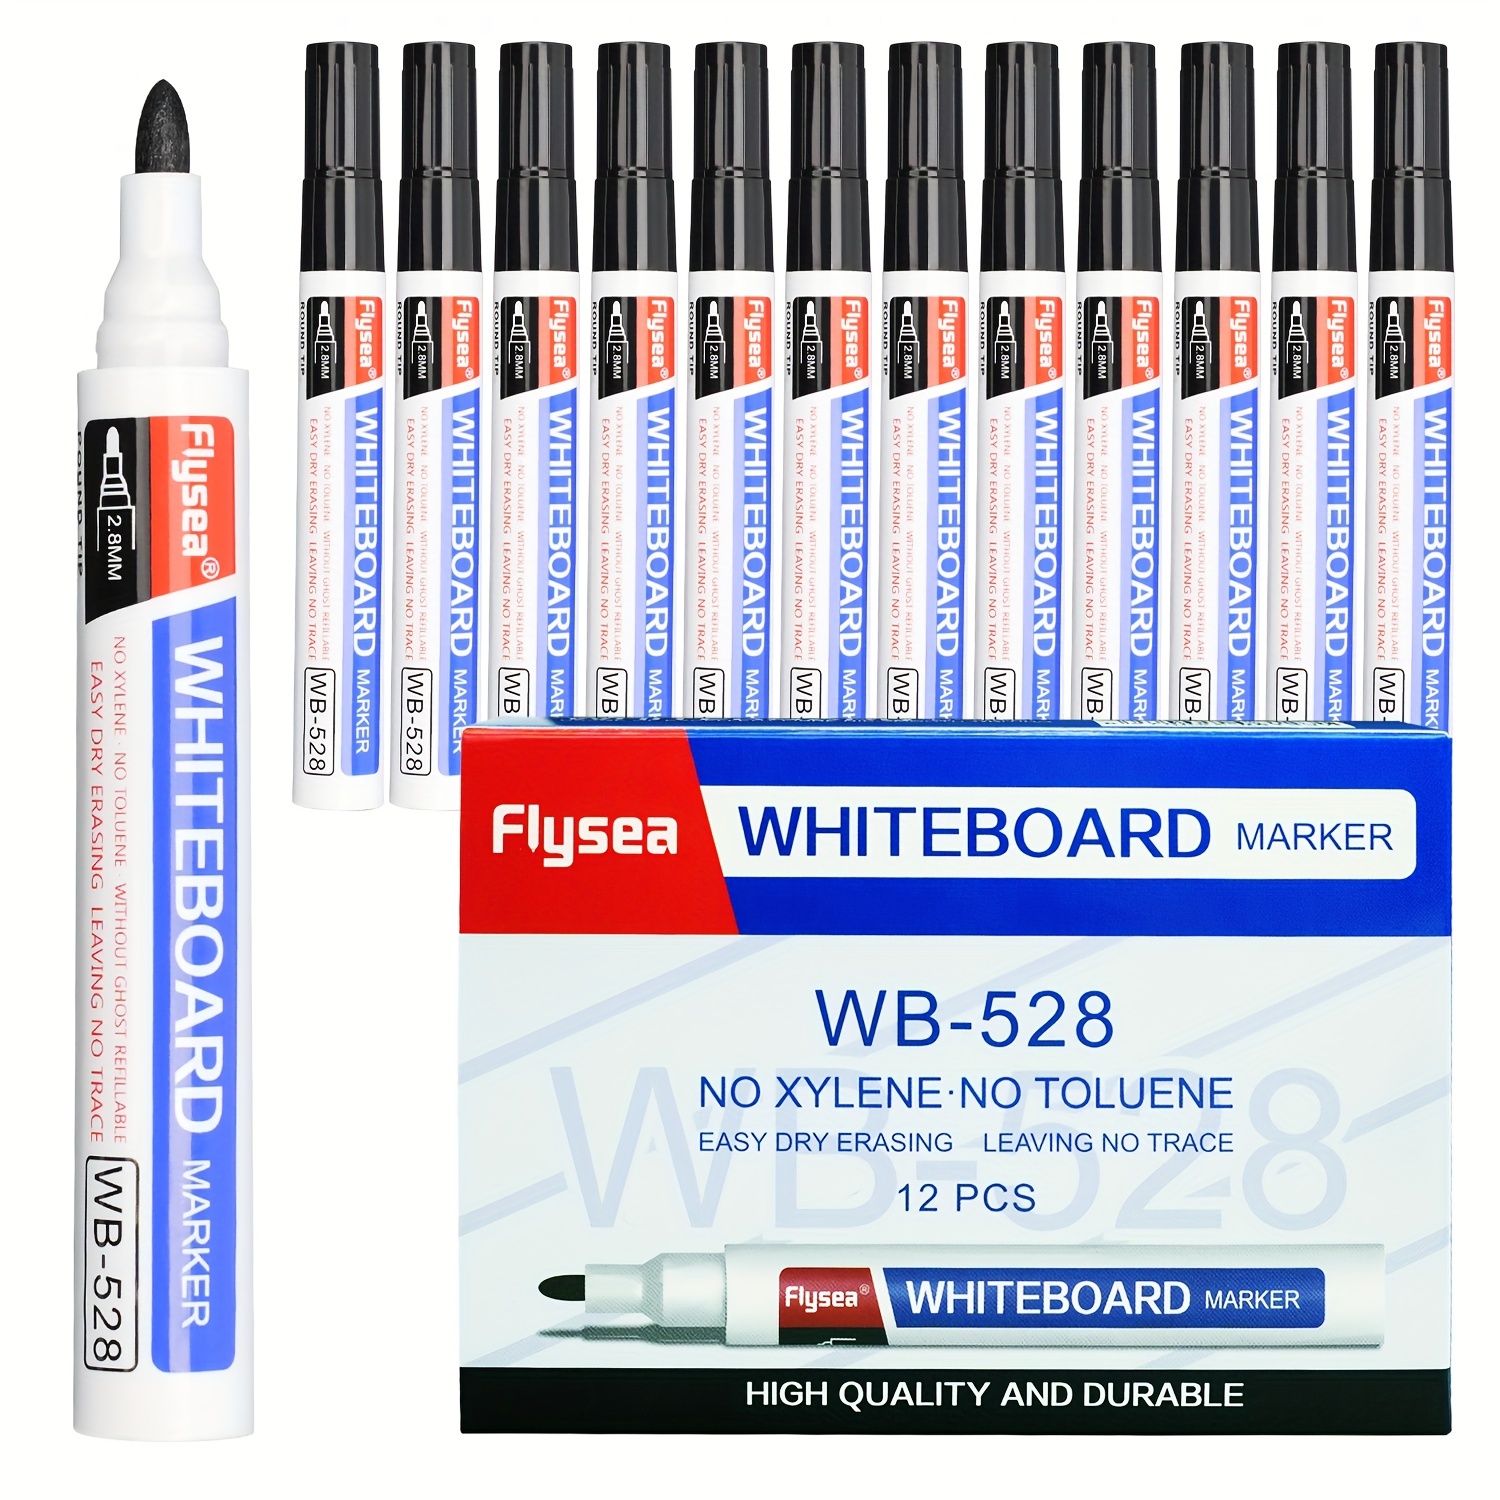 AIHAO Dry Erase Markers, Assorted Colors, Chisel Tip, Pack of 12,  Whiteboard Marker for School, Office, Home